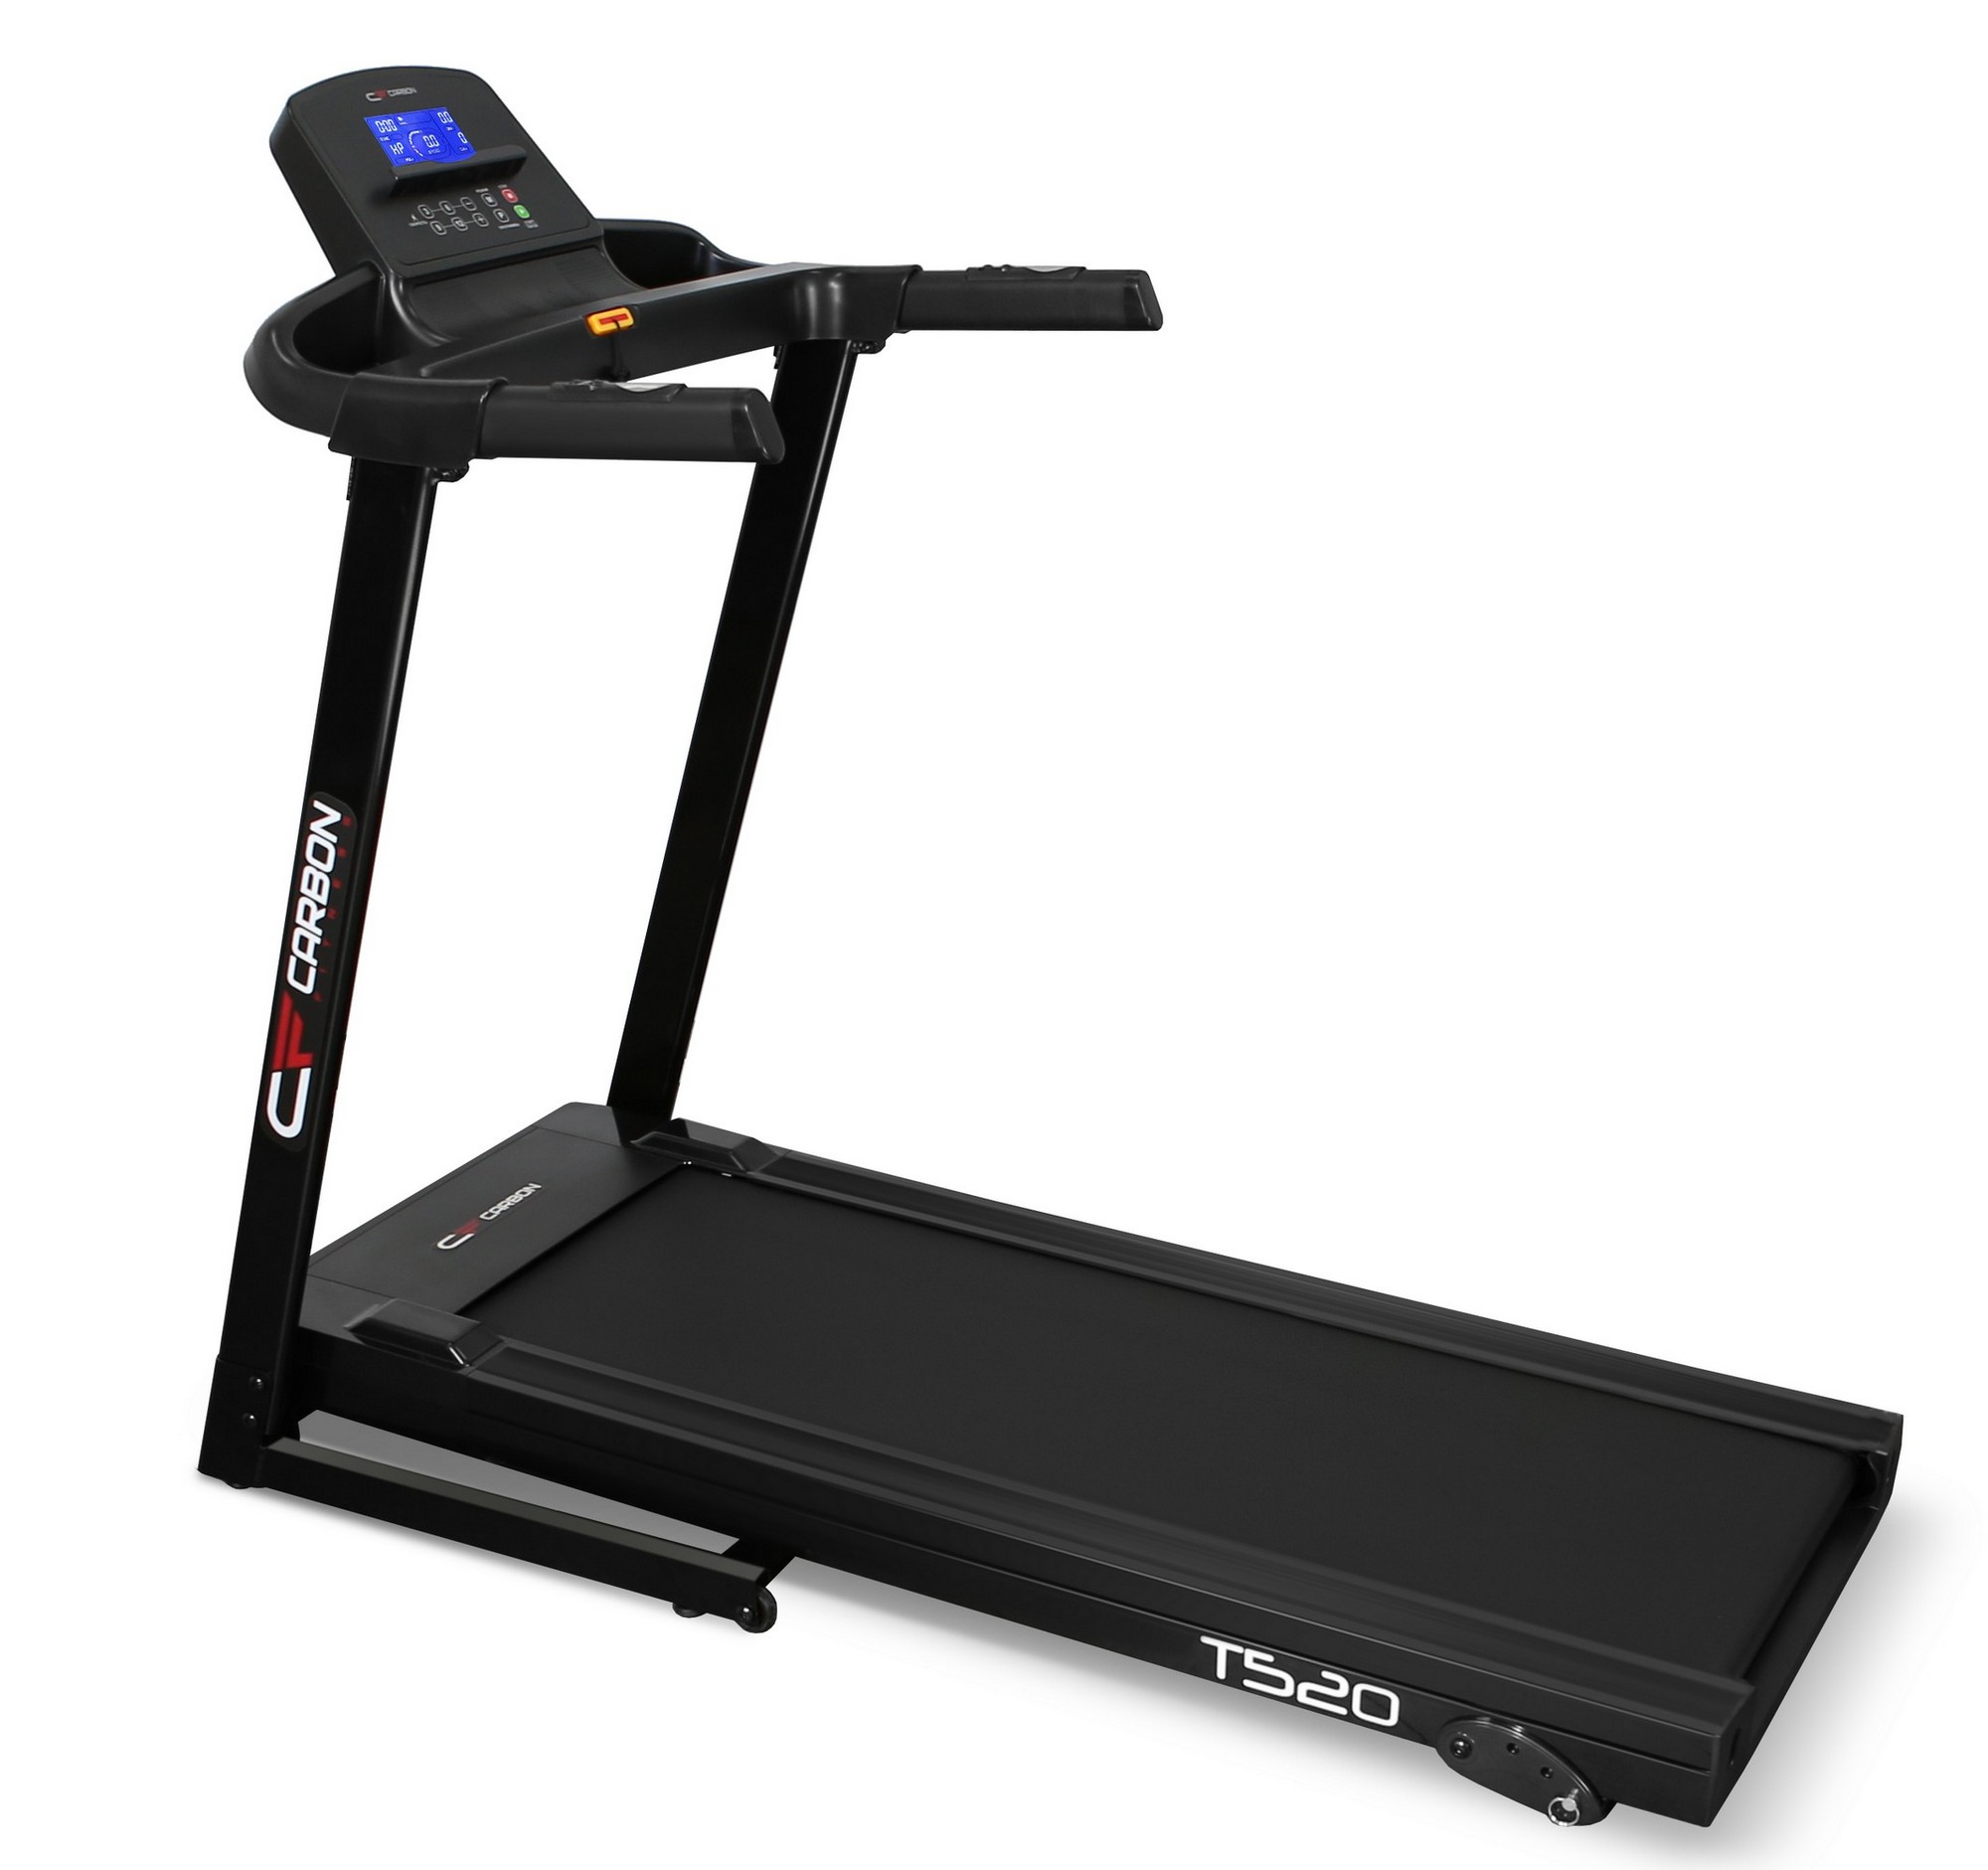    Carbon Fitness T520